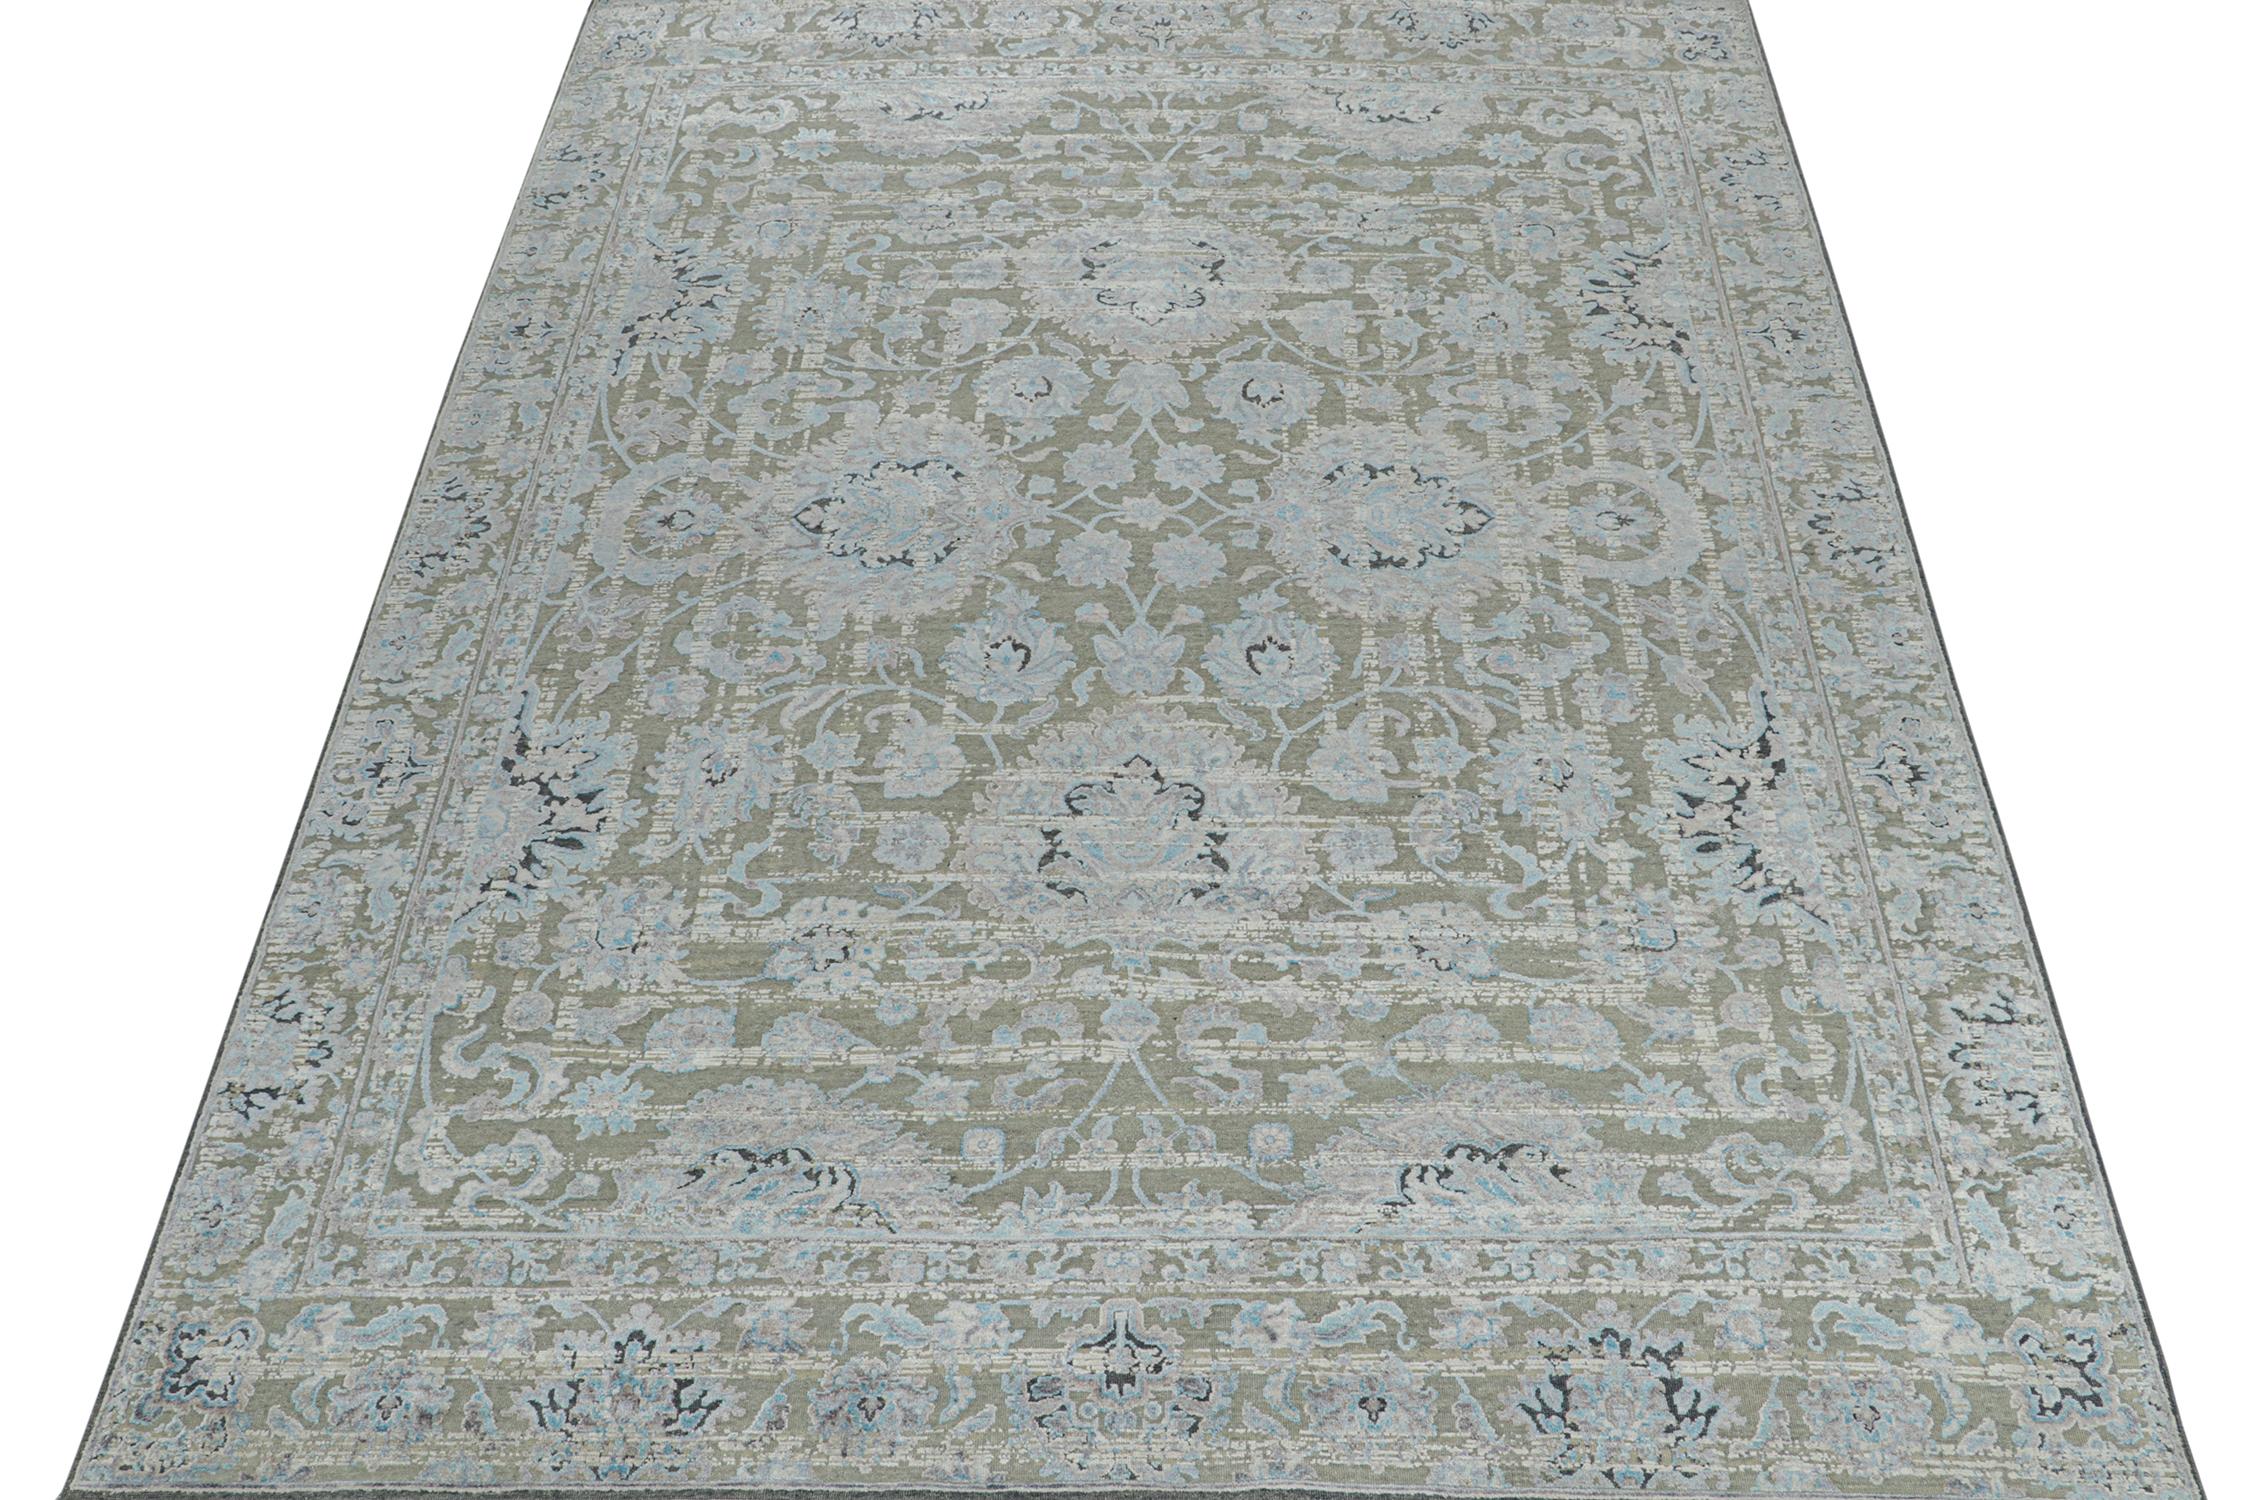 Indian Rug & Kilim’s Modern Classics Rug in Gray With Blue Floral Patterns For Sale